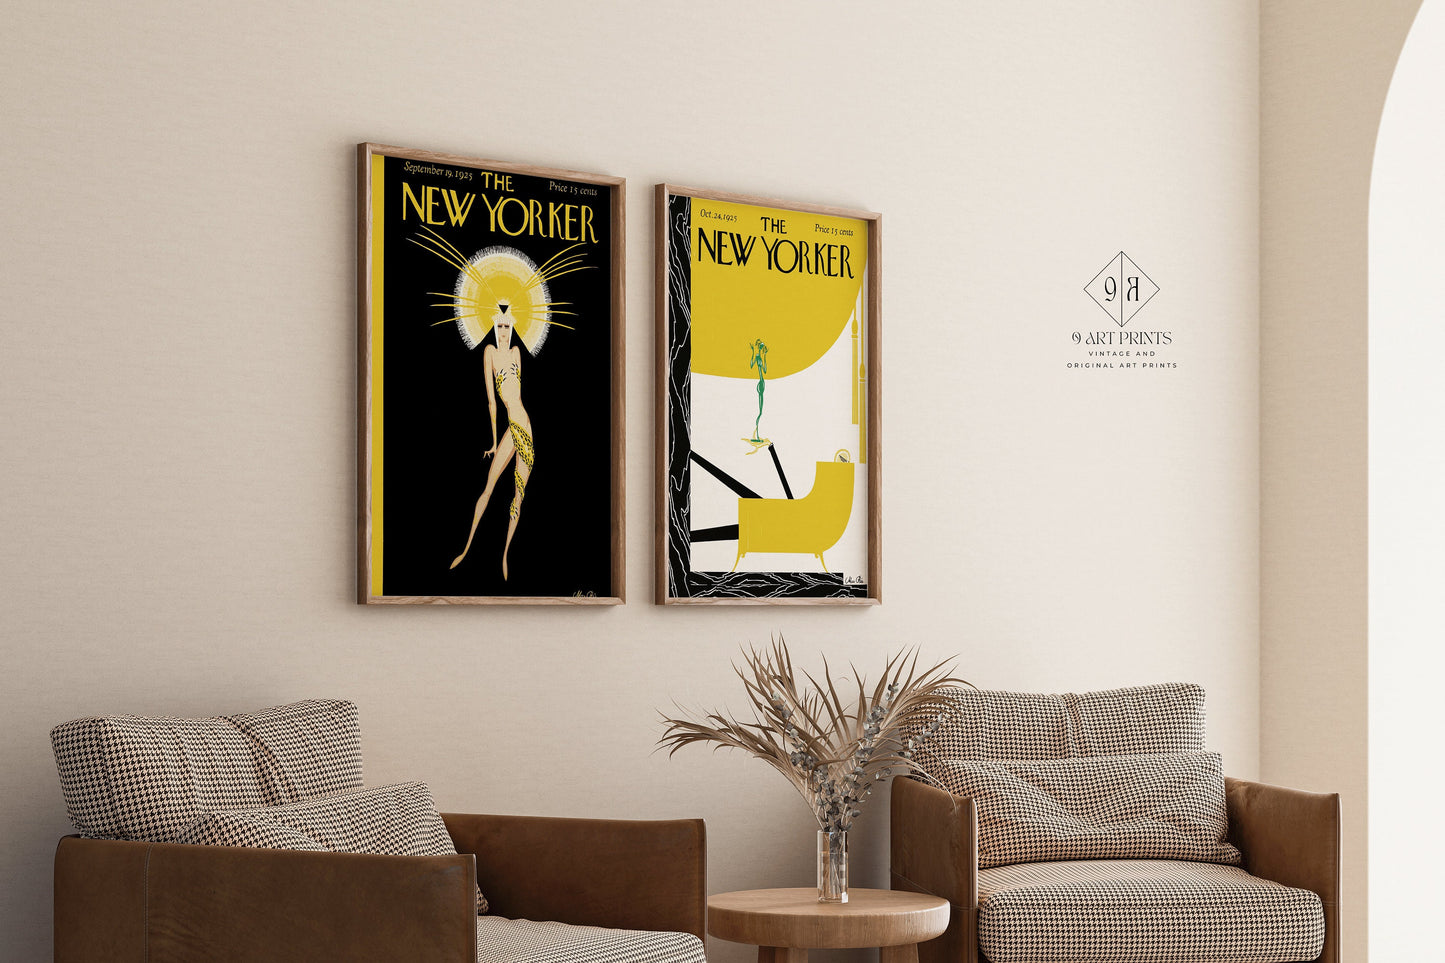 Set of 2 New Yorker Magazine Cover Print Black Gold Retro Vintage Style Aesthetic Art Print Home Office Decor Ready to hang Framed Gift